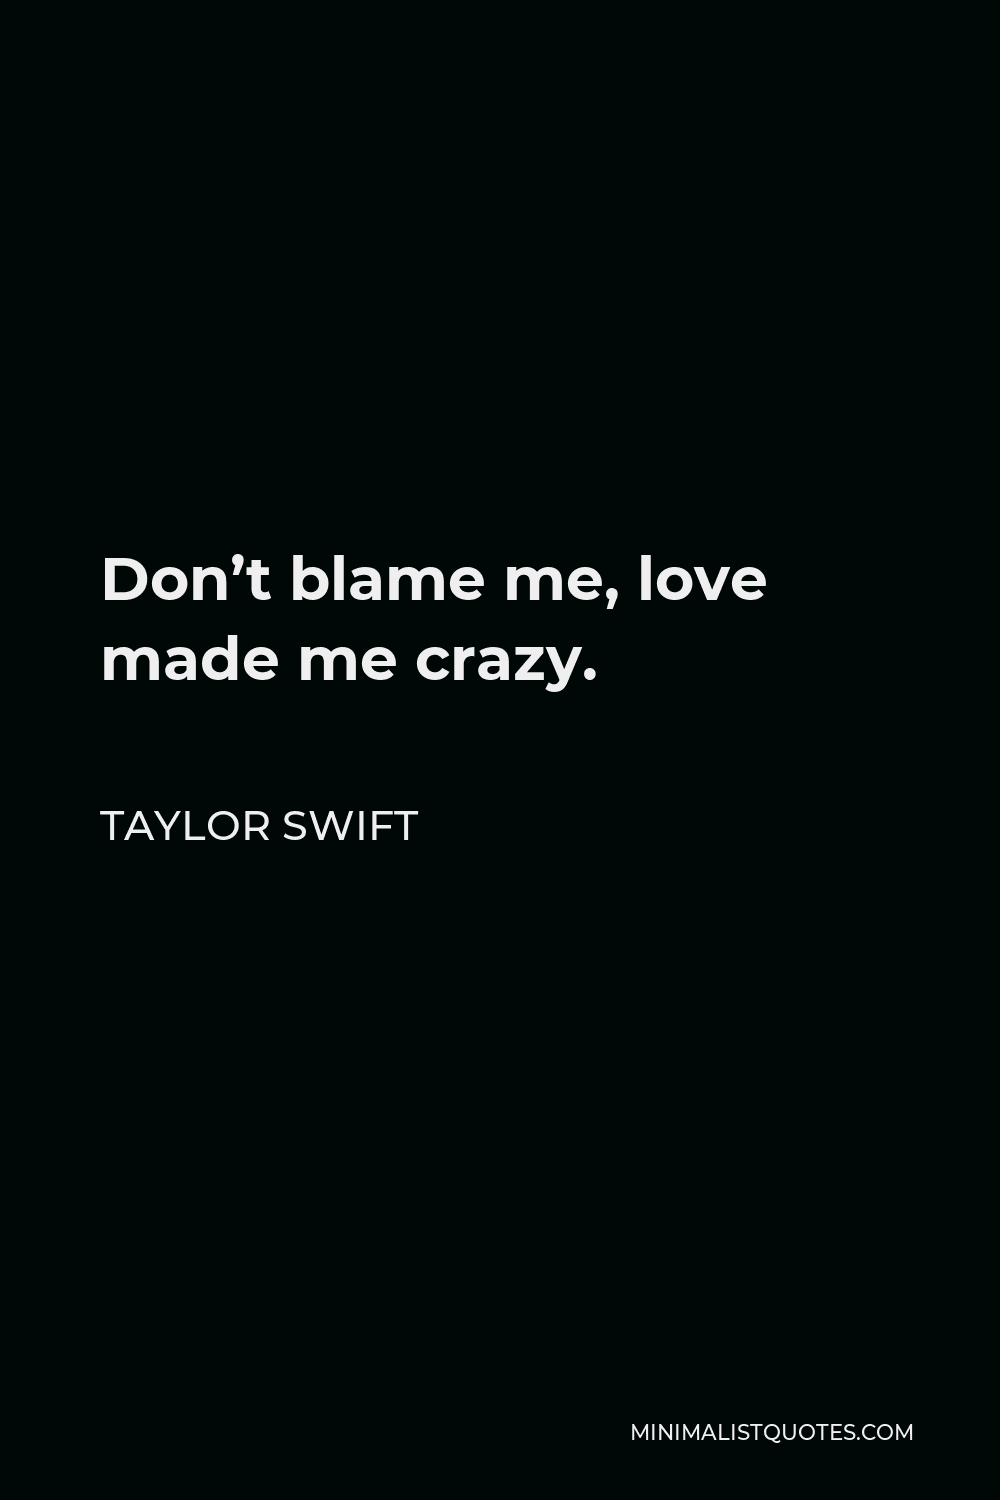 Taylor Swift Quote: Don't blame me, love made me crazy.